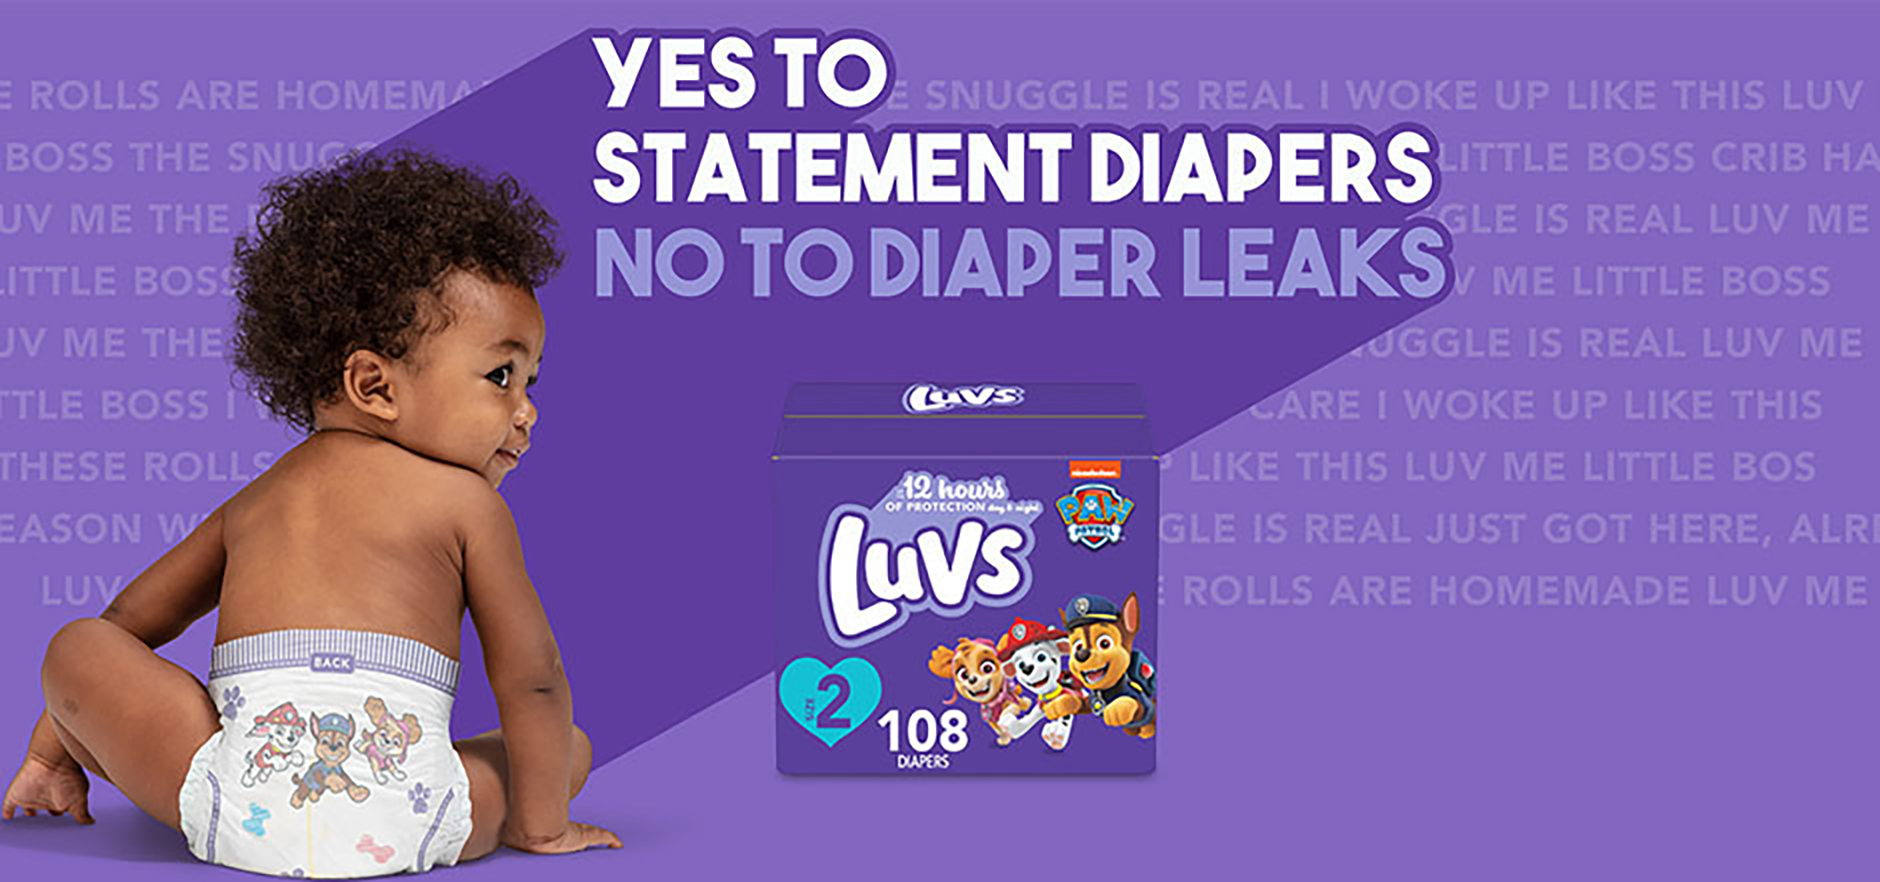 Luvs Baby Diapers Size 7 - 88 Count - Andronico's